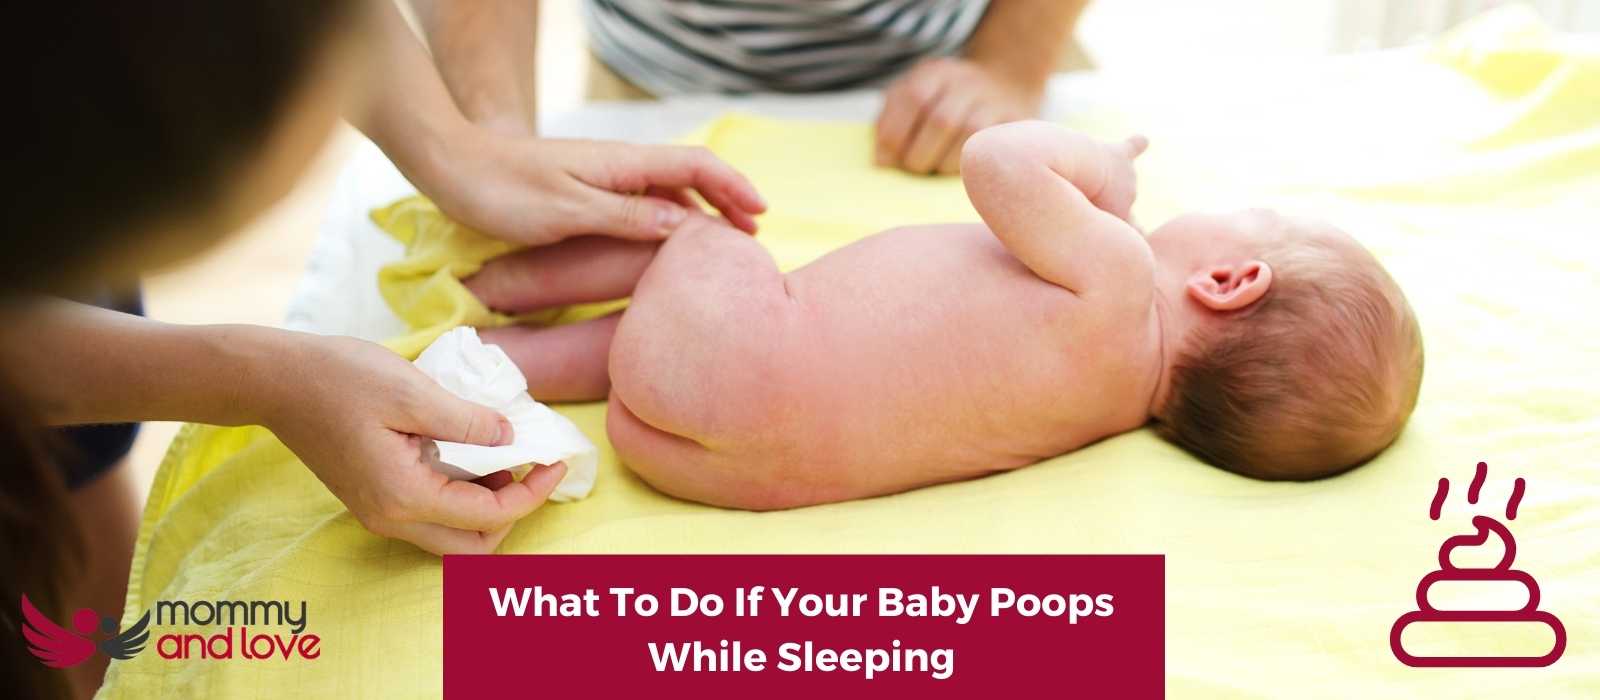 What To Do If Your Baby Poops While Sleeping